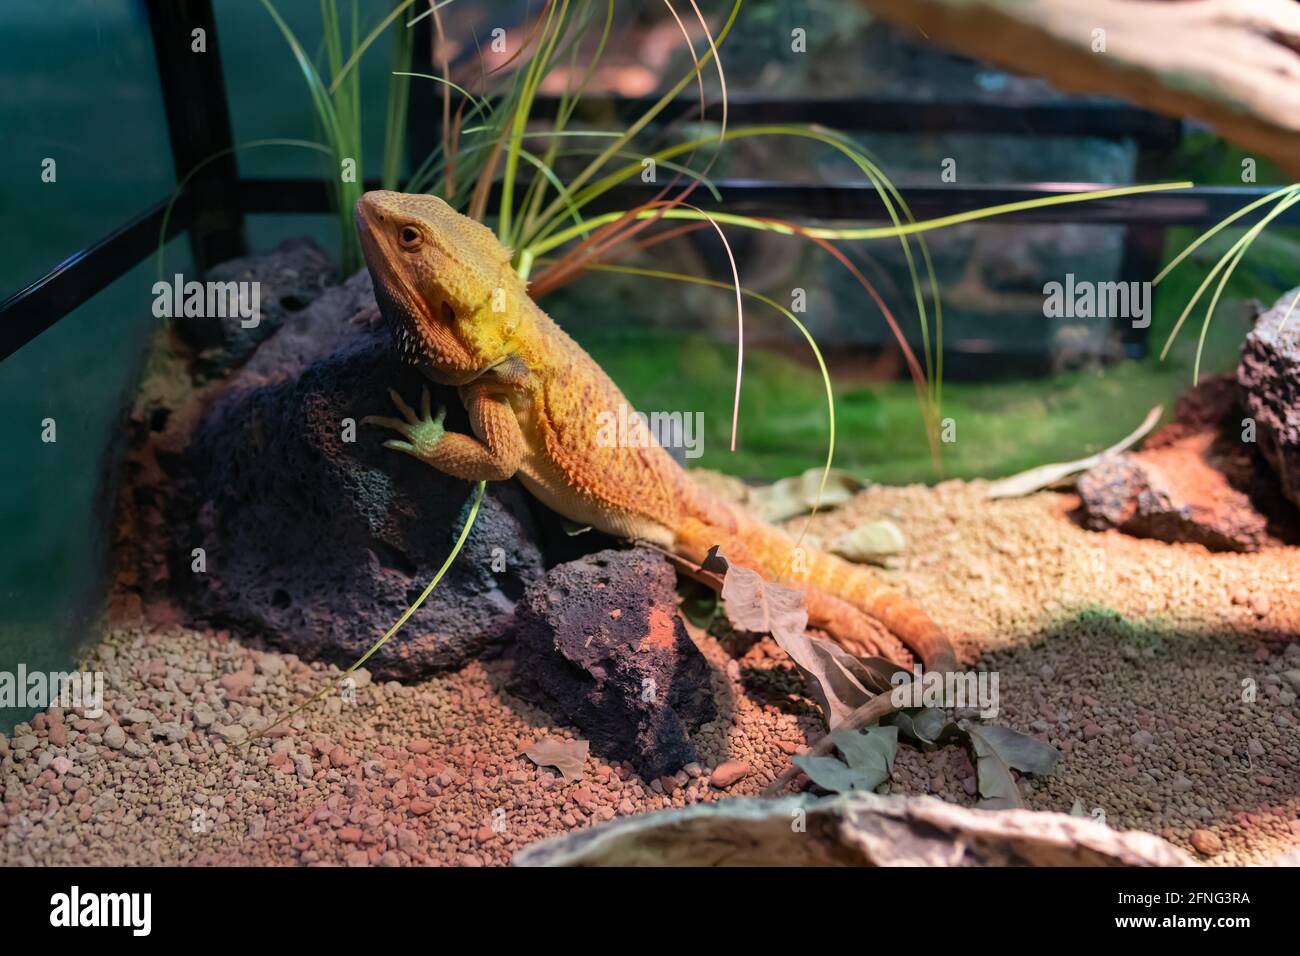 a pet chameleon in a tank Stock Photo